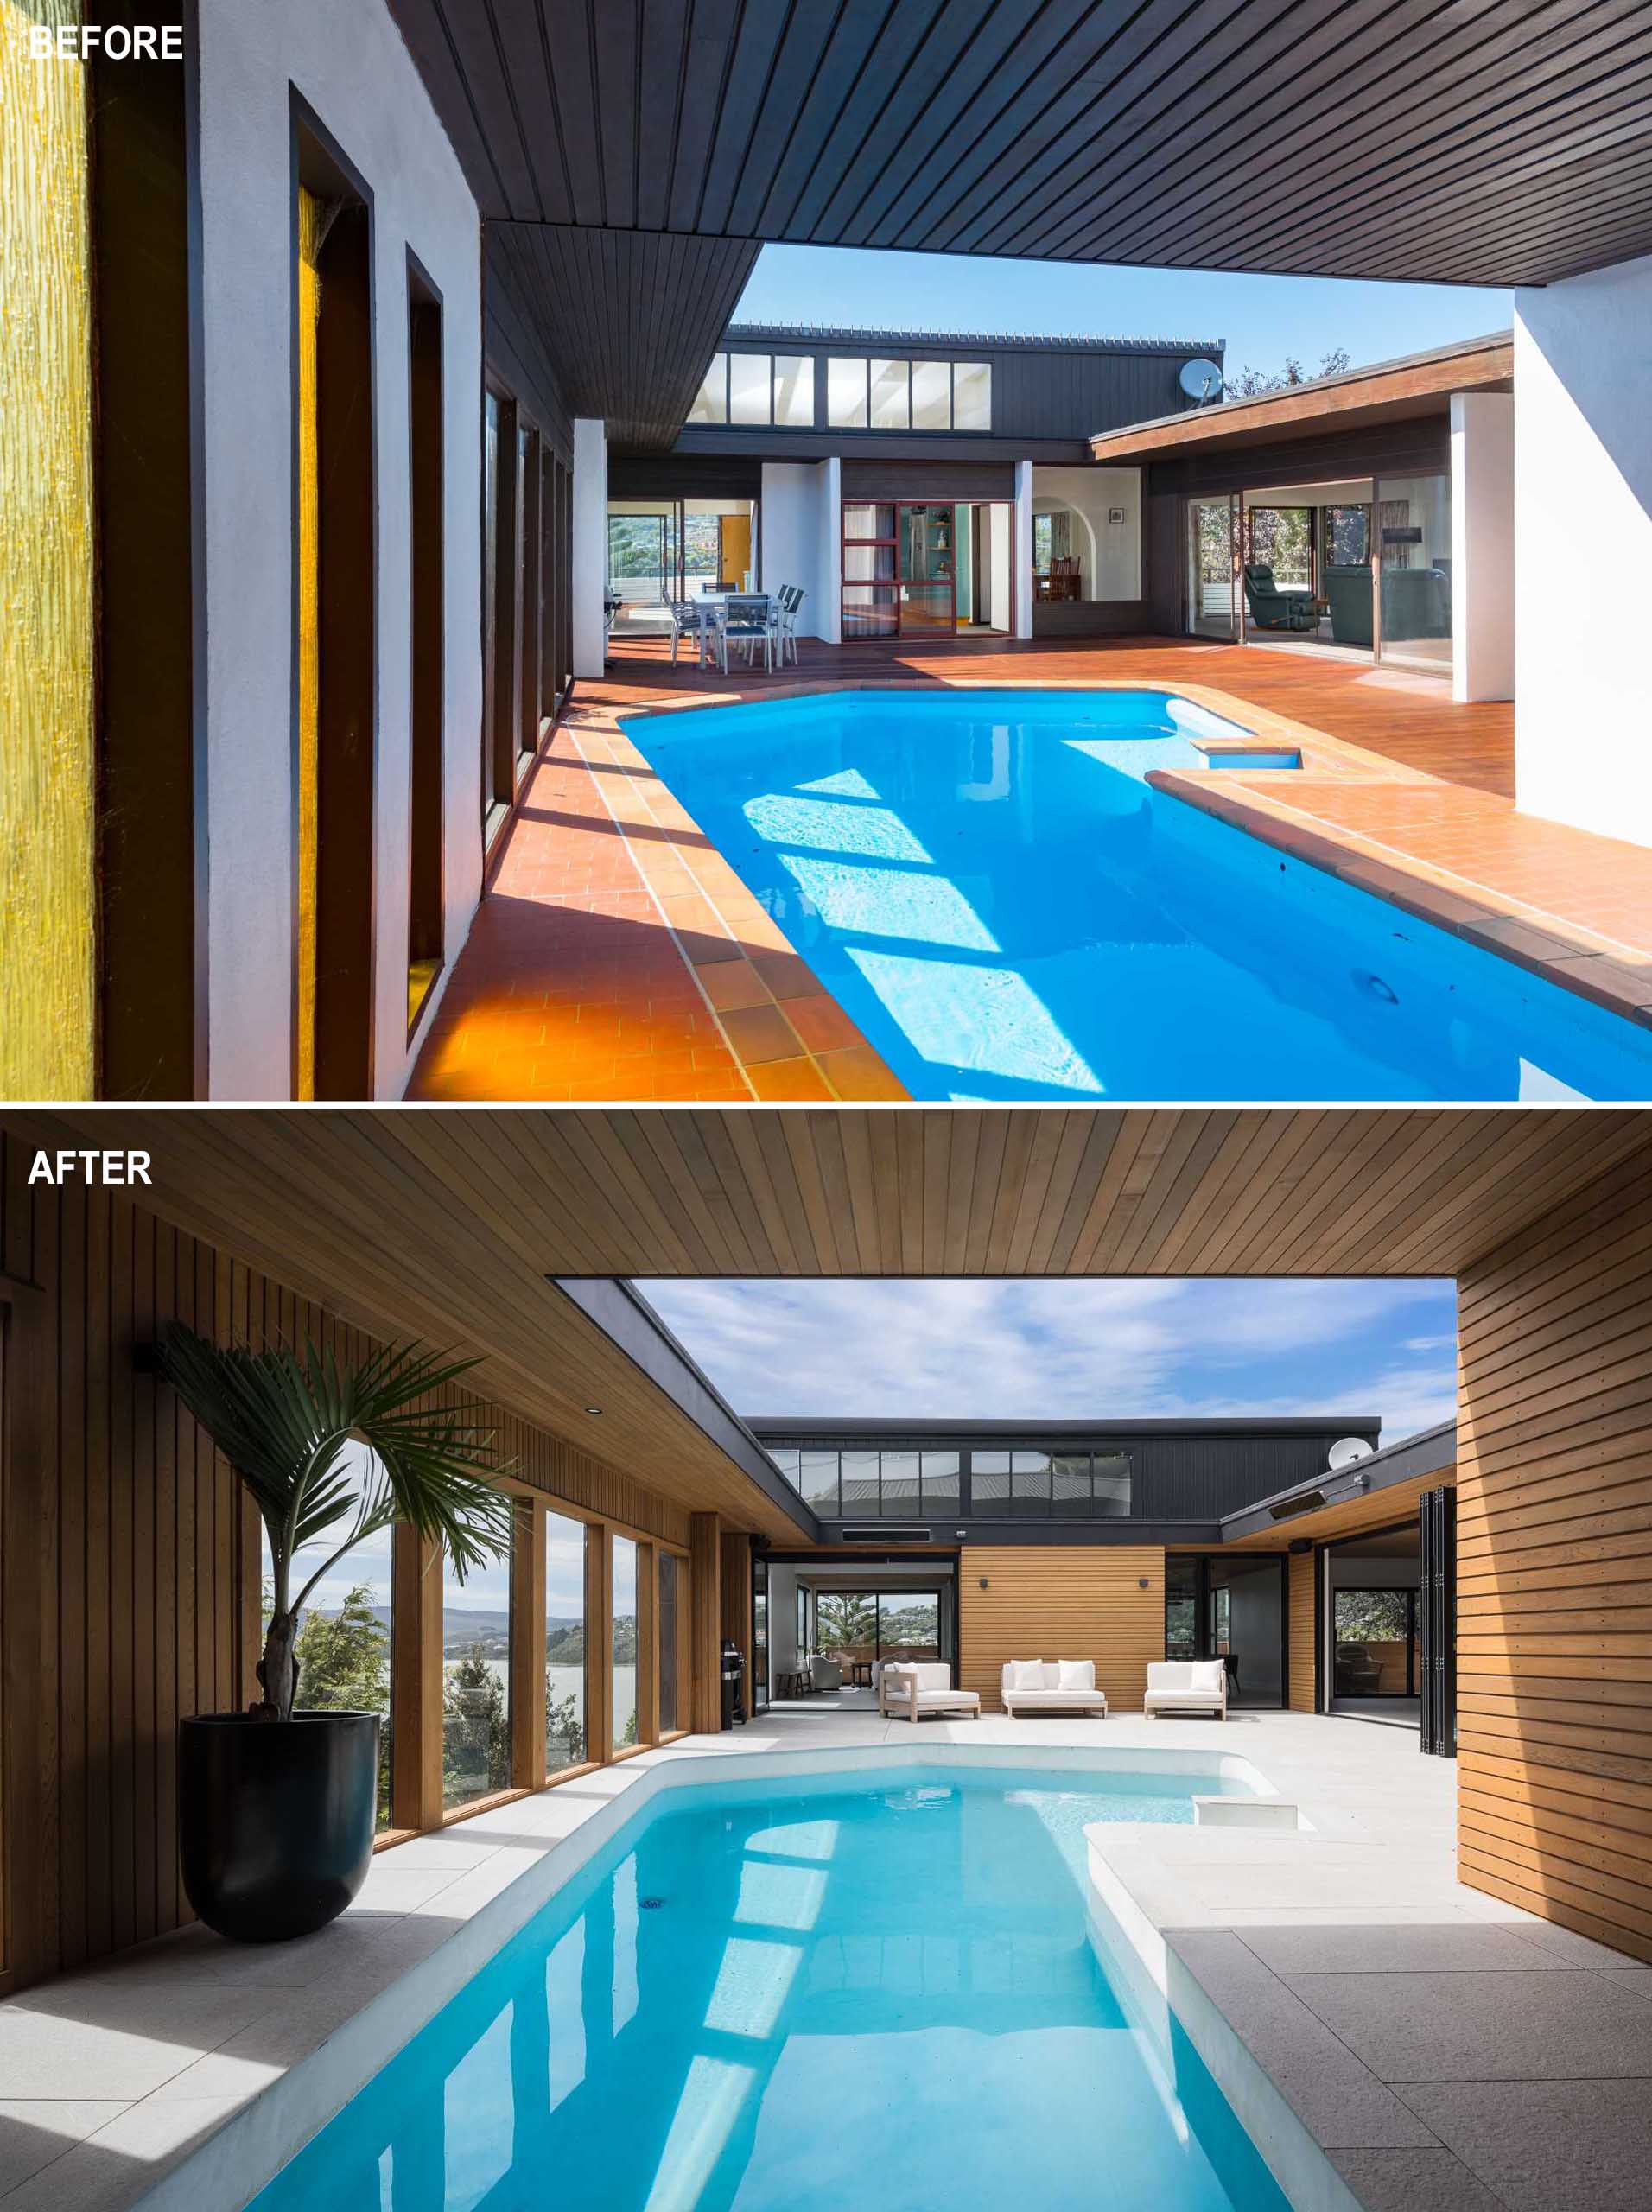 The home is wrapped around a swimming pool, that originally had brick coloured tiles. The updated swimming pool is now surrounded by grey tiles, while the walls have been lined with wood.